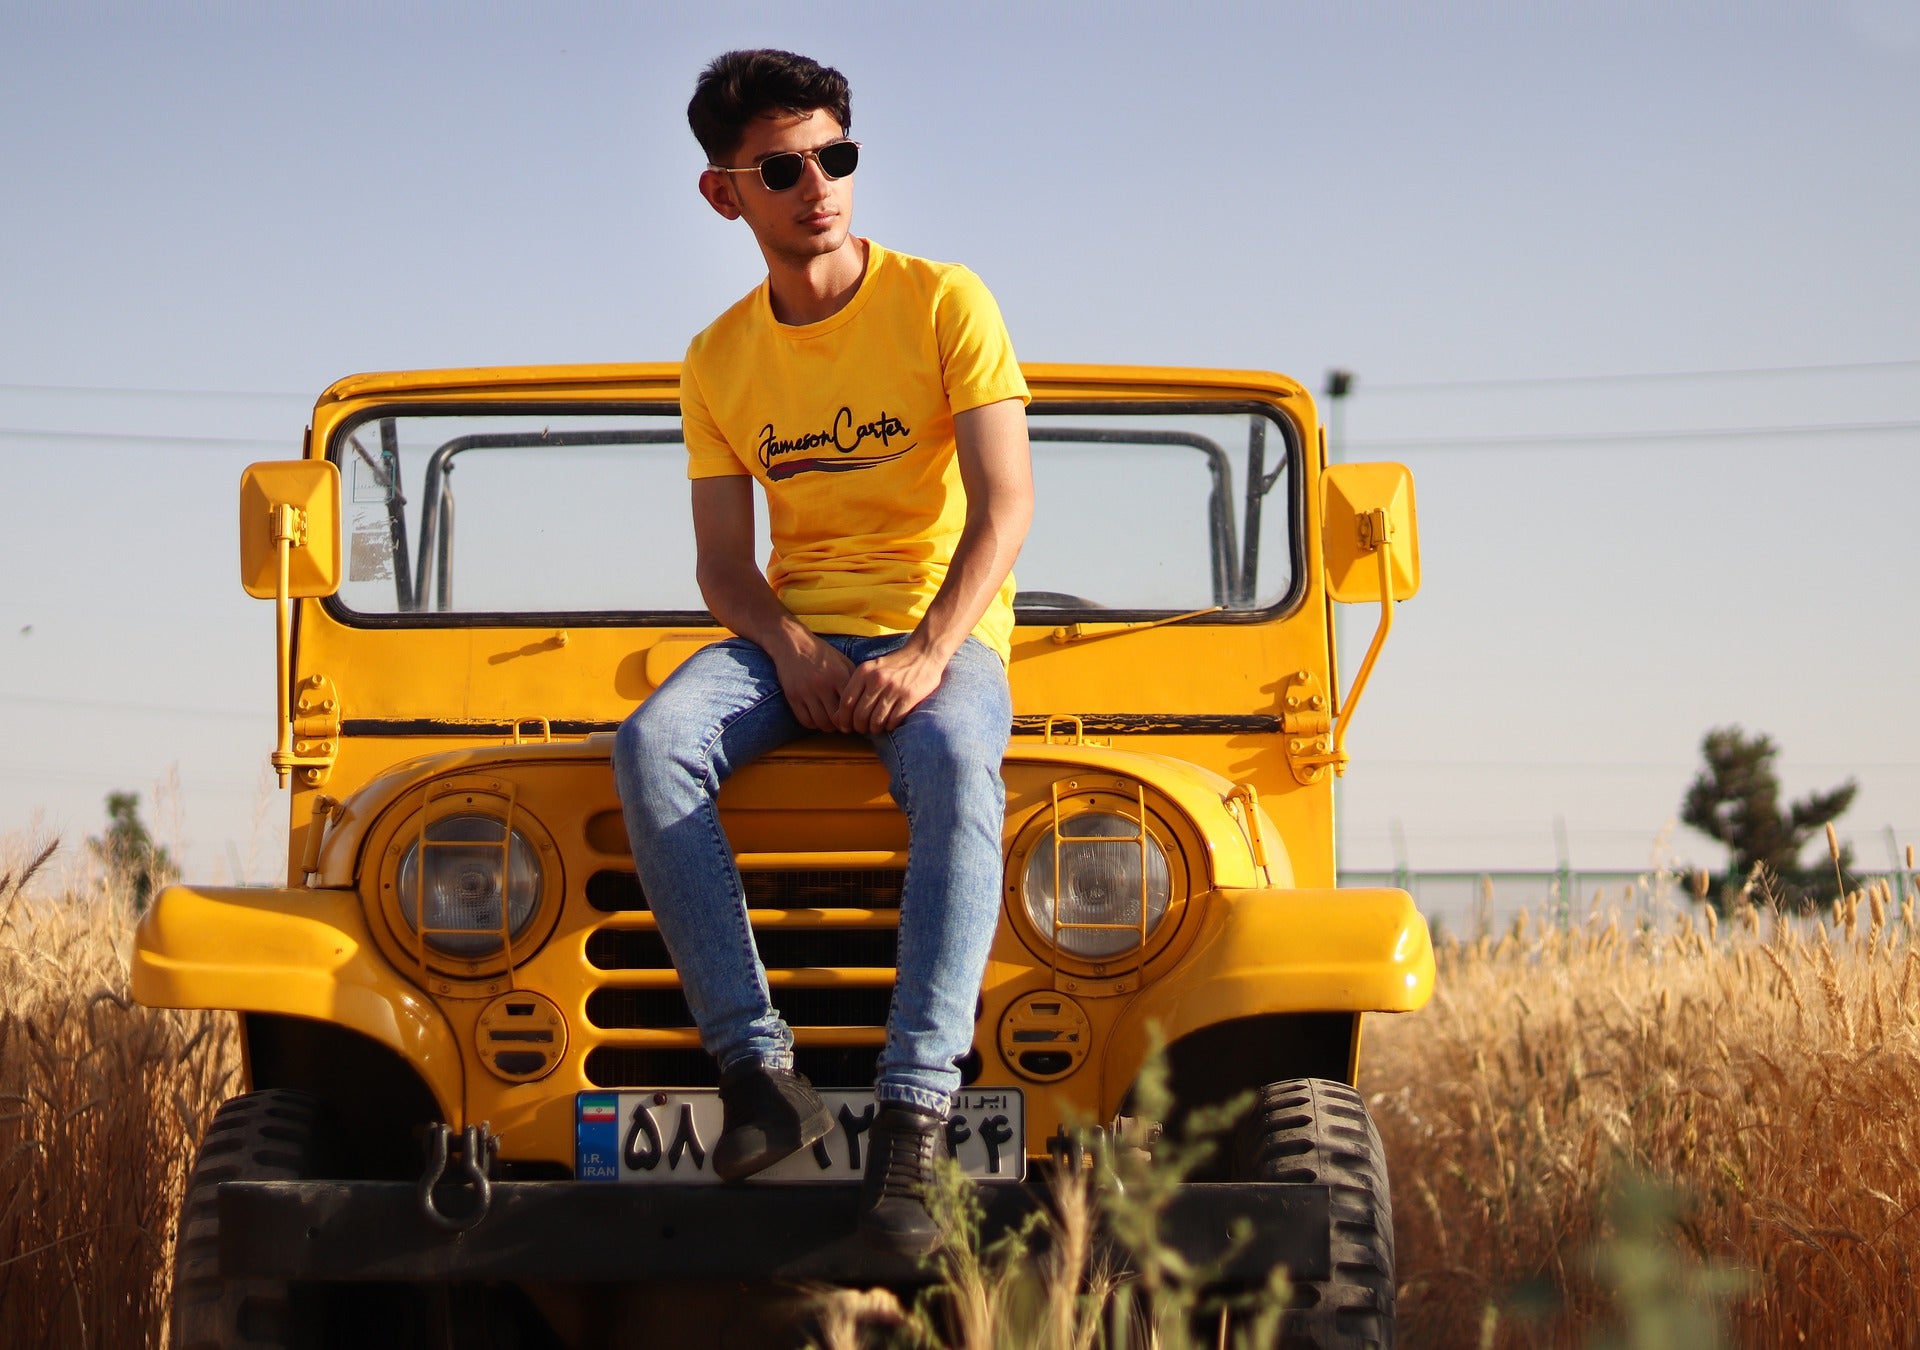 Meet James and his Yellow Jeep!